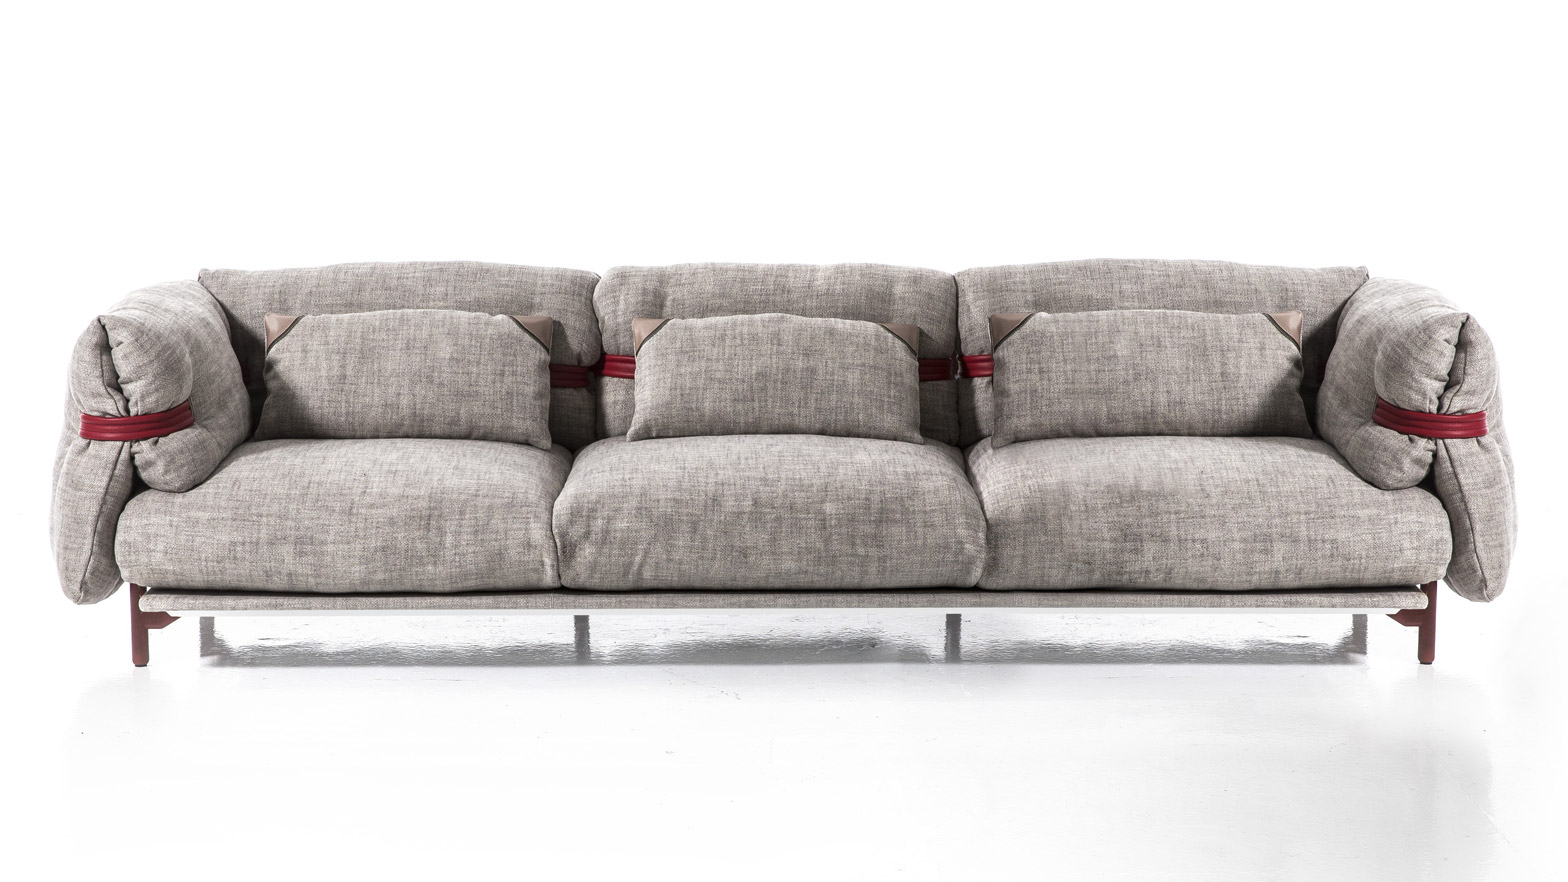 M.A.S.S.A.S. by Patricia Urquiola for Moroso